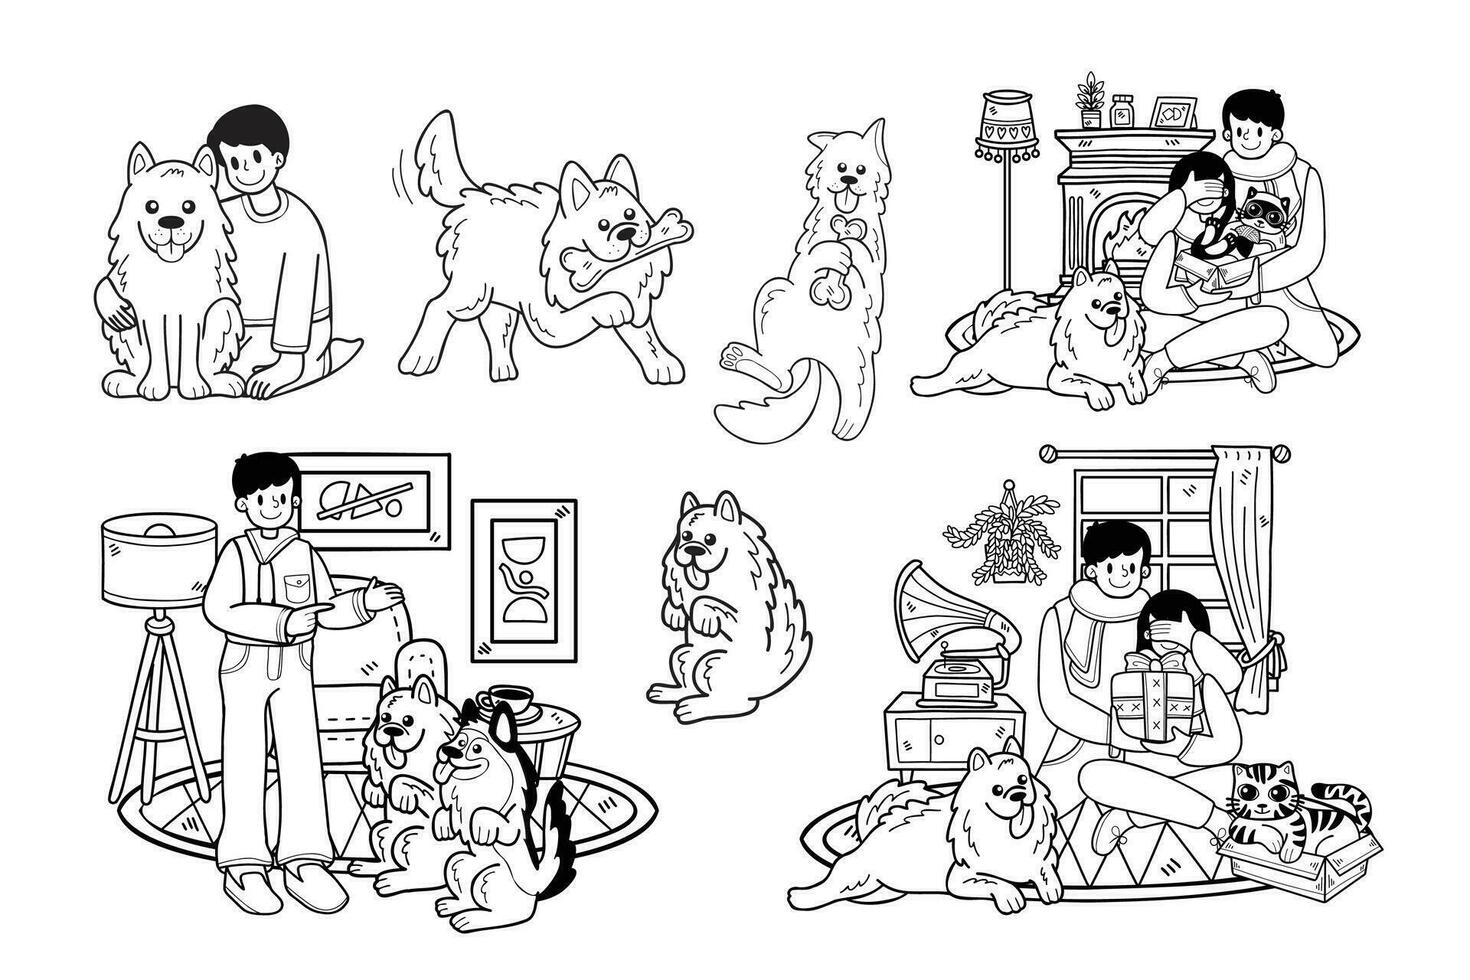 Hand Drawn Samoyed dog and family collection in flat style illustration for business ideas vector